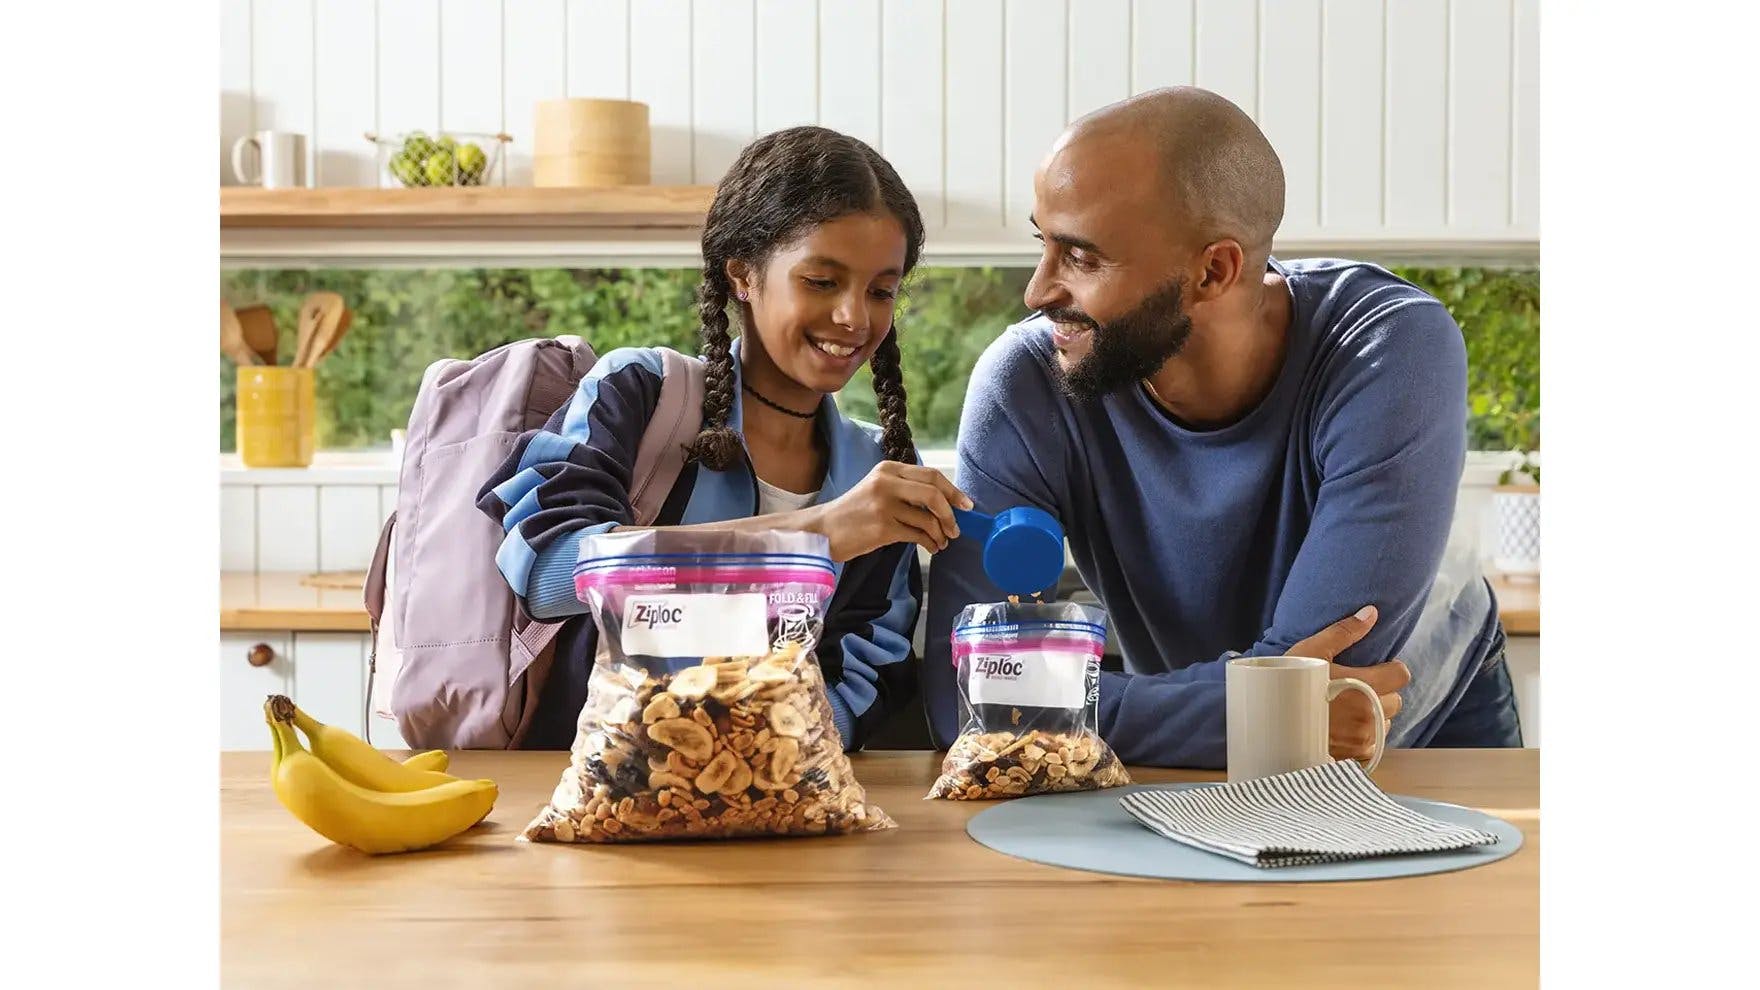 Young girl and man in a kitchen adding trail mix into bags